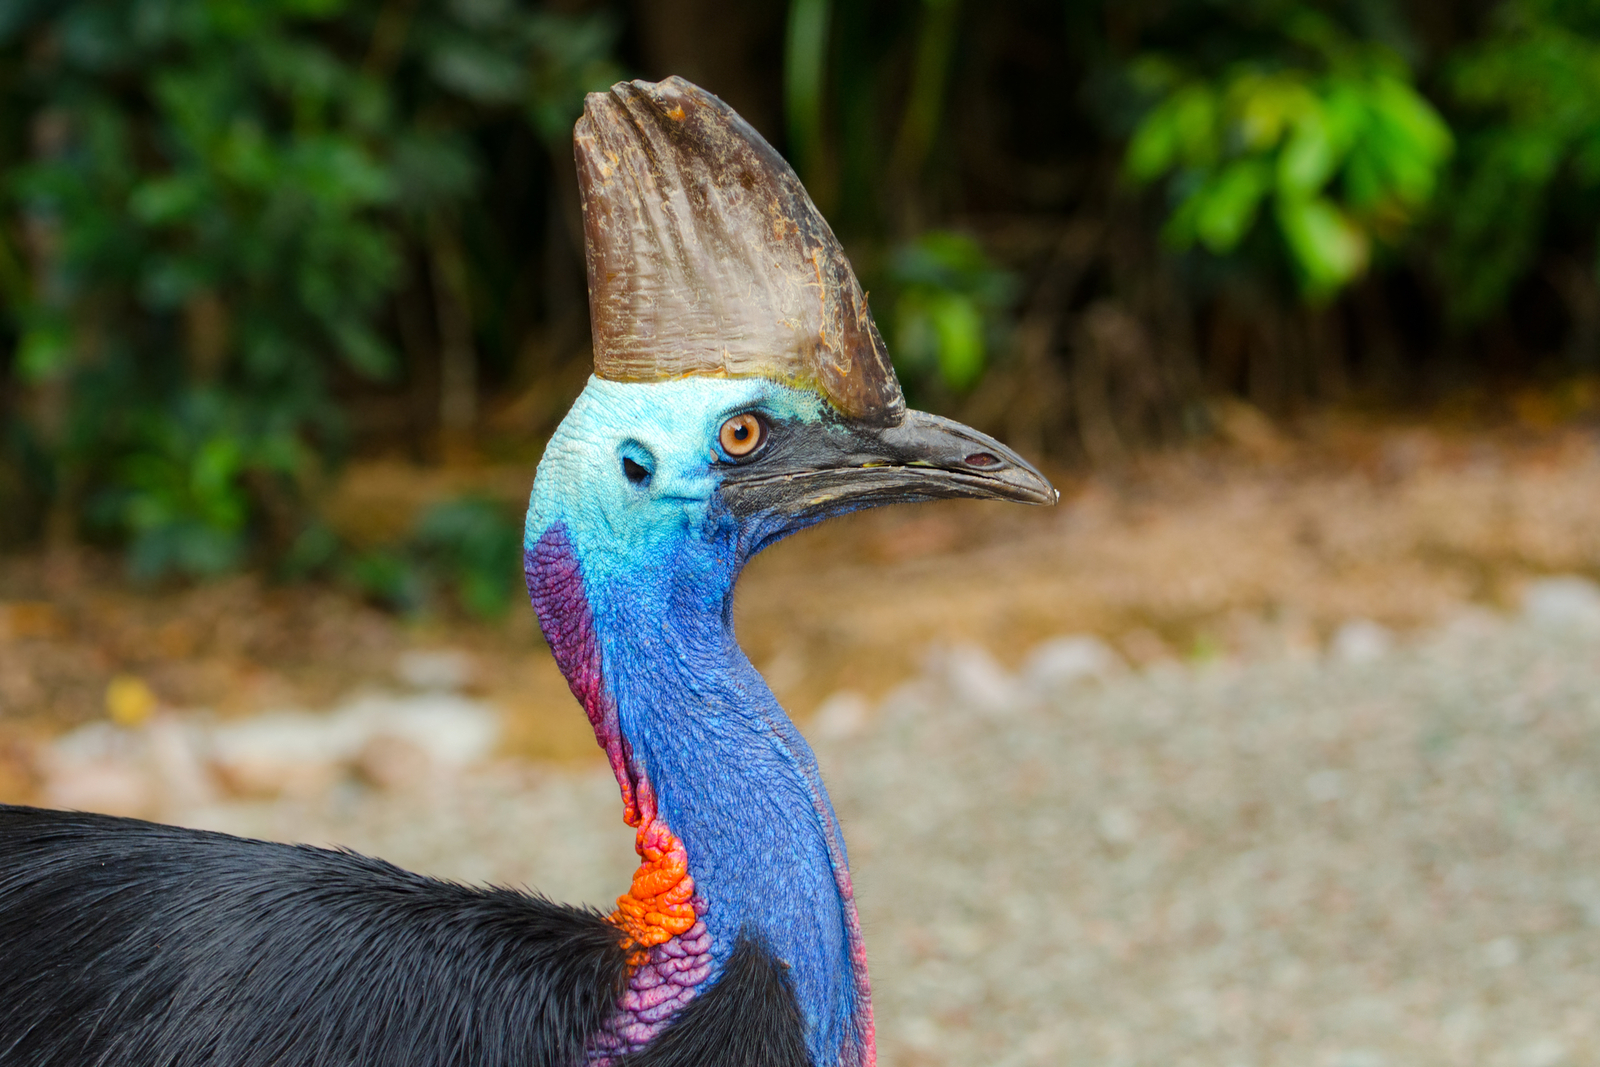 Southern cassowaries can disperse large seeds after eating the rainforest fruit that other animals aren’t capable of moving, thereby helping propagate the forest. Image Credit: © Birdiegal717 | Dreamstime.com.